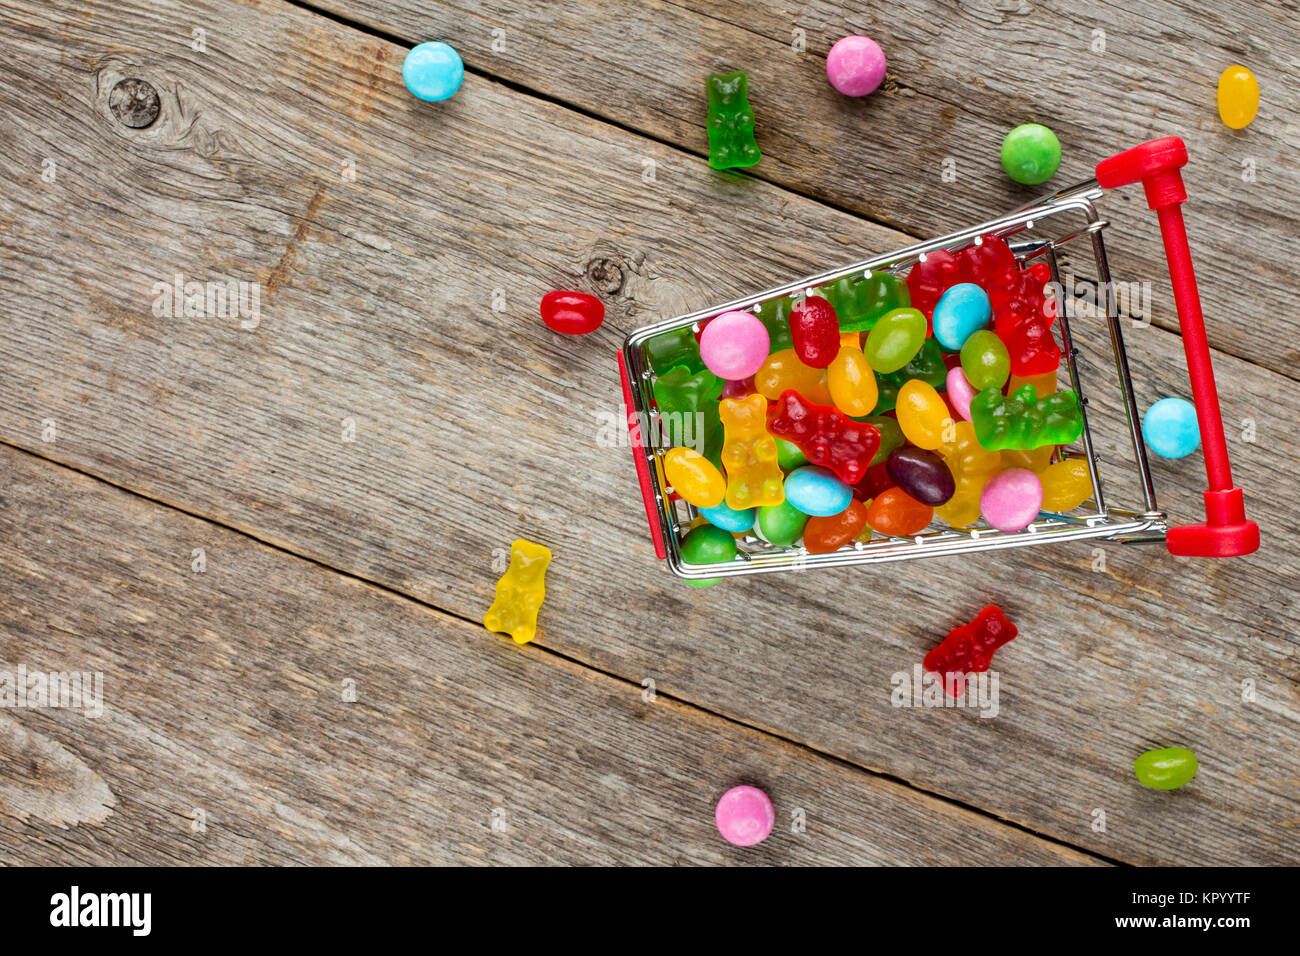 Shopping cart full of candies Stock Photo